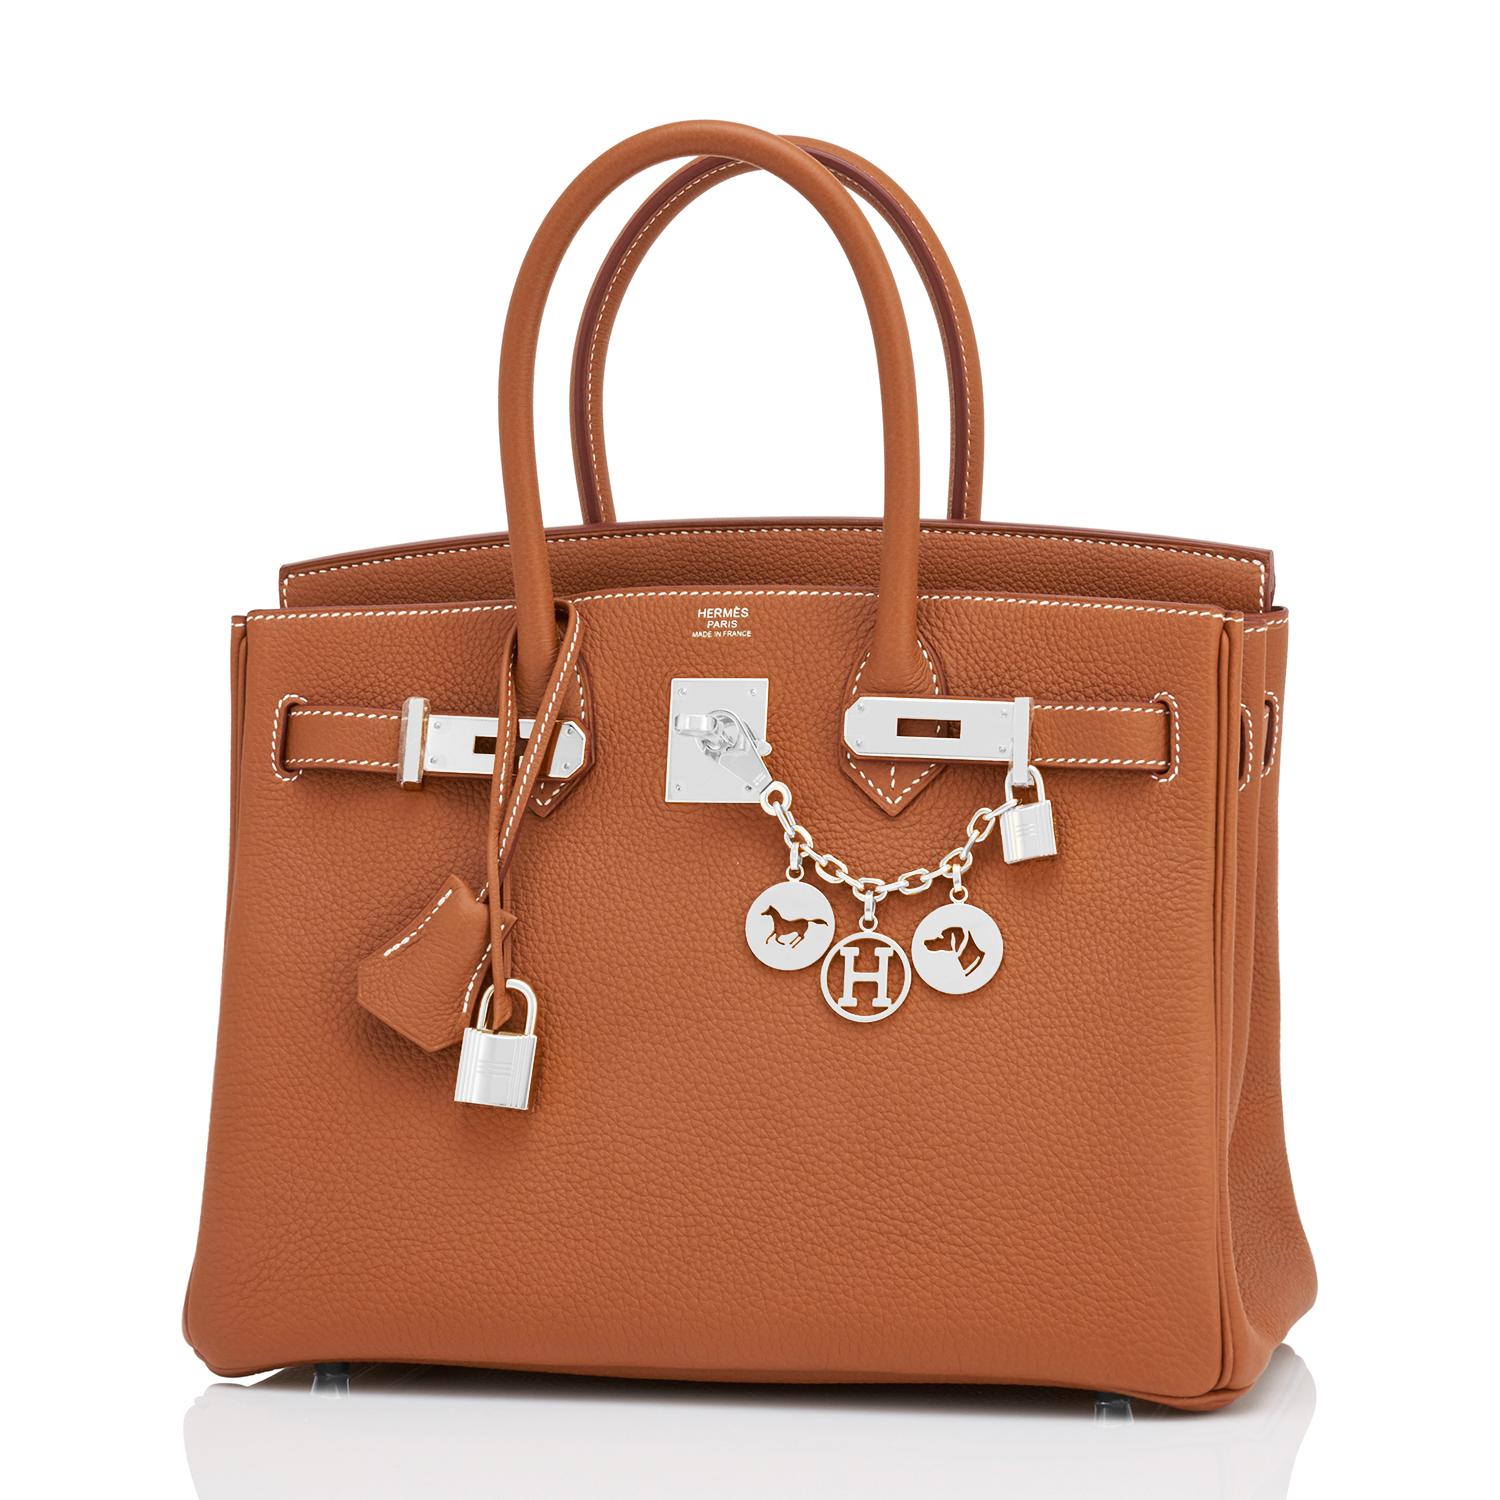 Hermes Birkin 30cm Gold Tan Togo Palladium Bag U Stamp, 2022
Just purchased from Hermes store- bag bears new 2022 interior U Stamp!
Brand New in Box. Store Fresh. Pristine Condition (with plastic on hardware). 
Perfect gift! Comes with lock, keys,